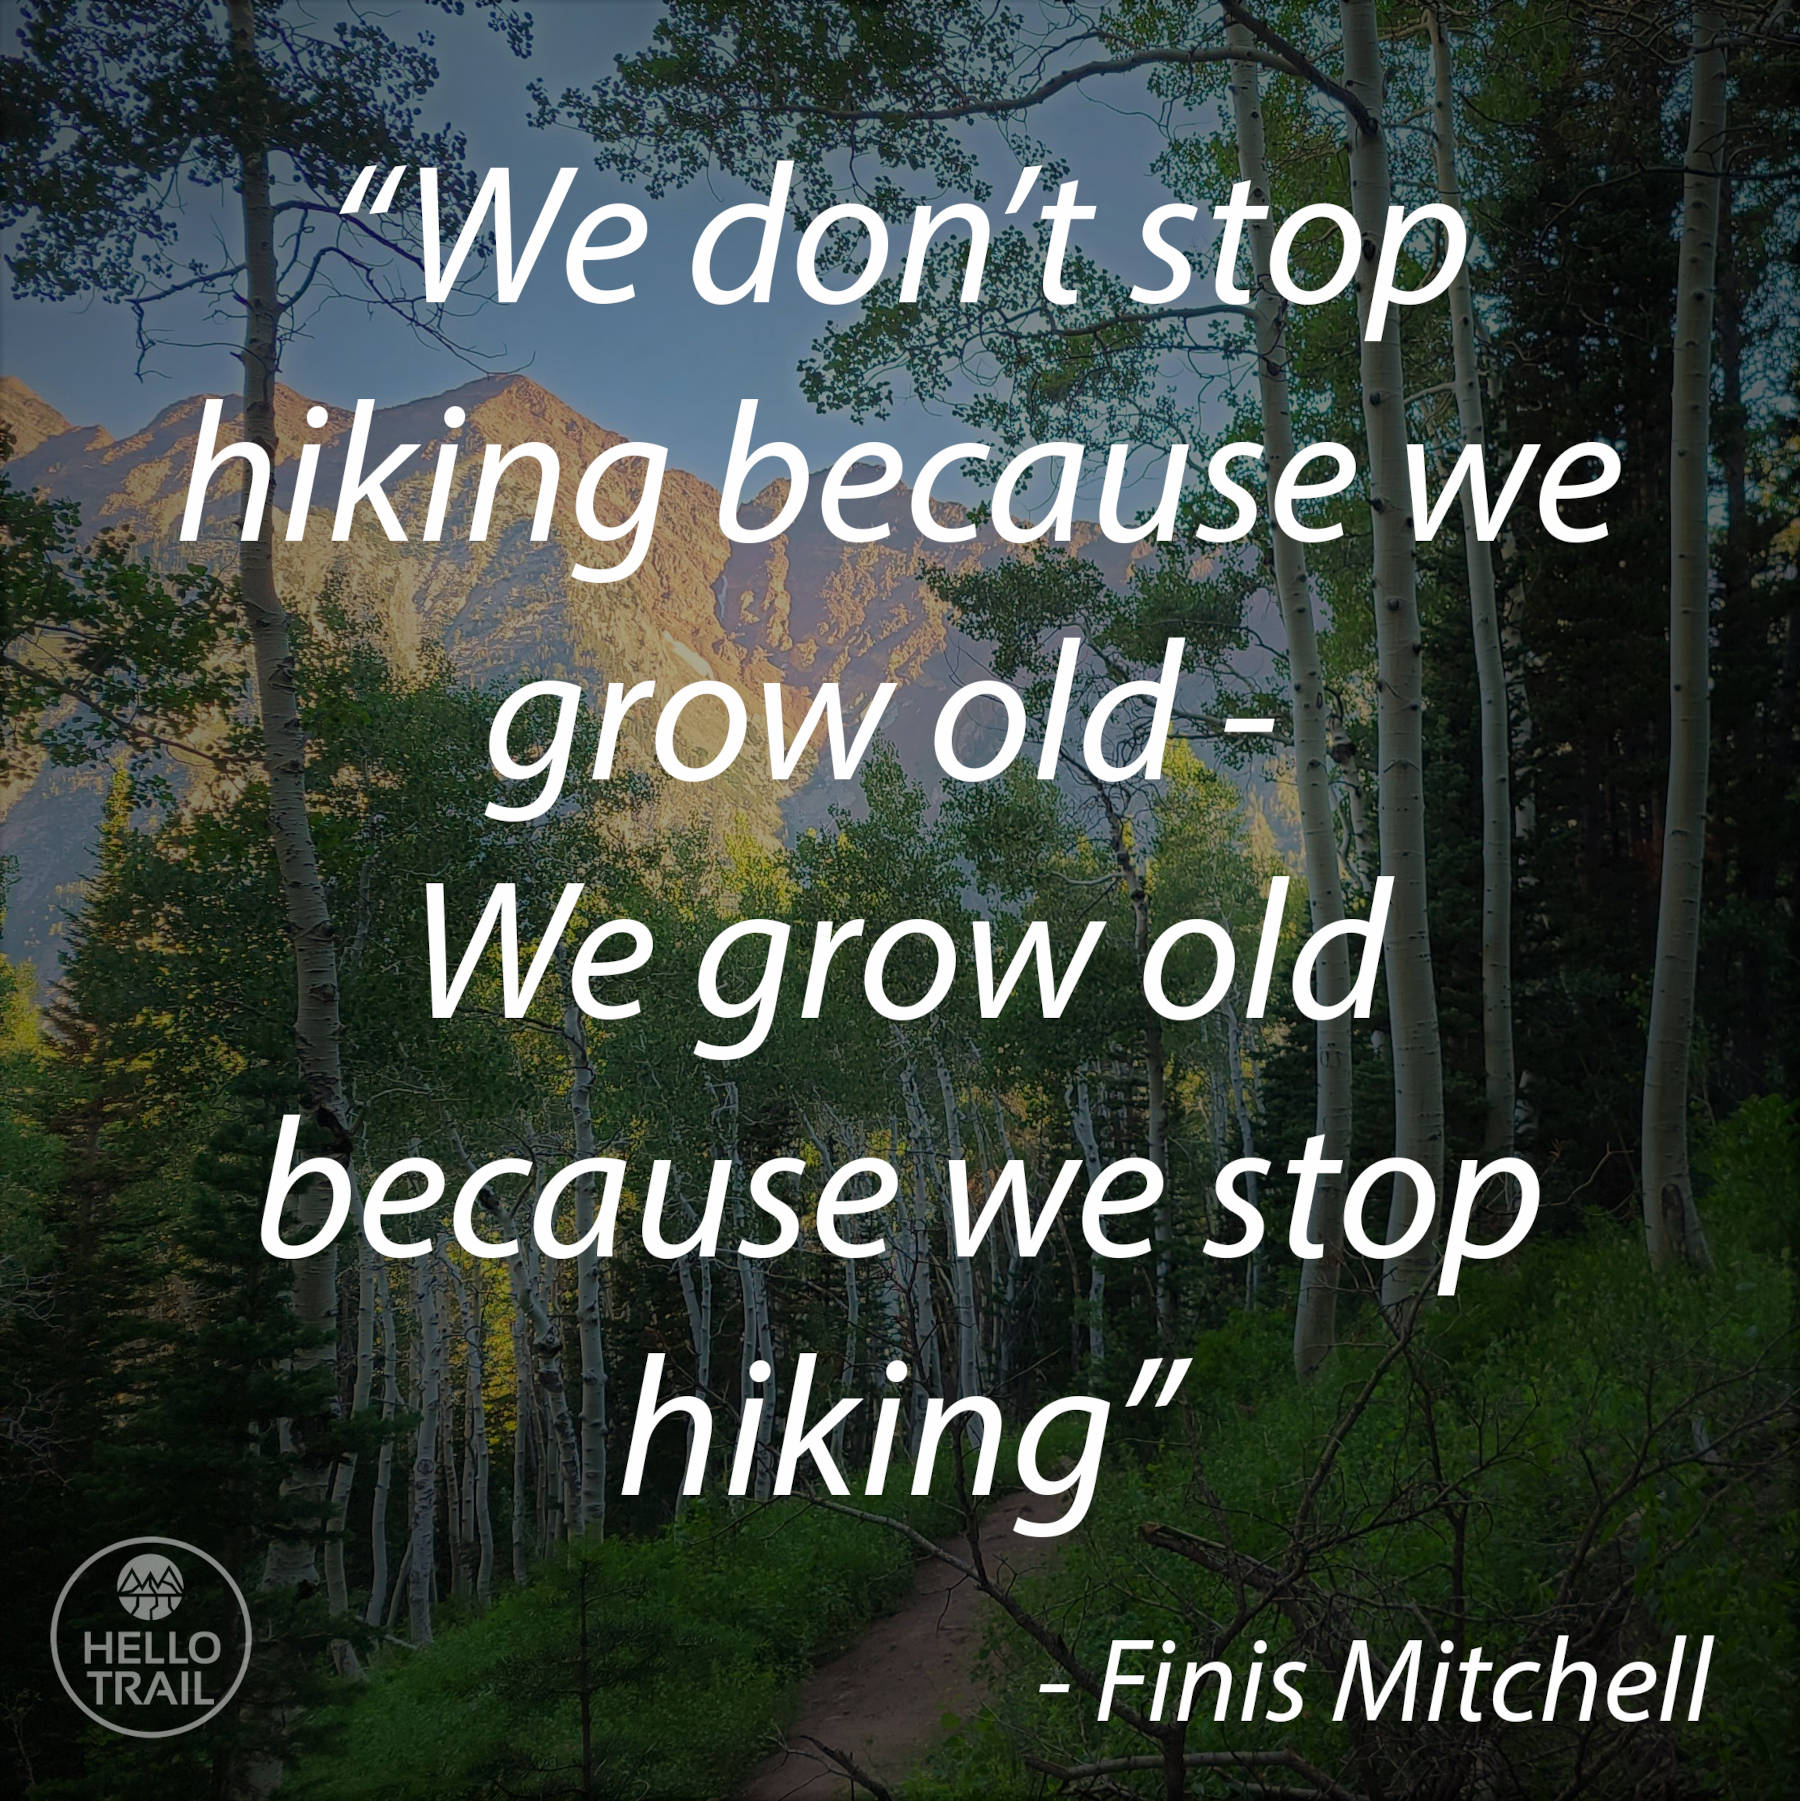 Finis Mitchell hiking quote about growing old